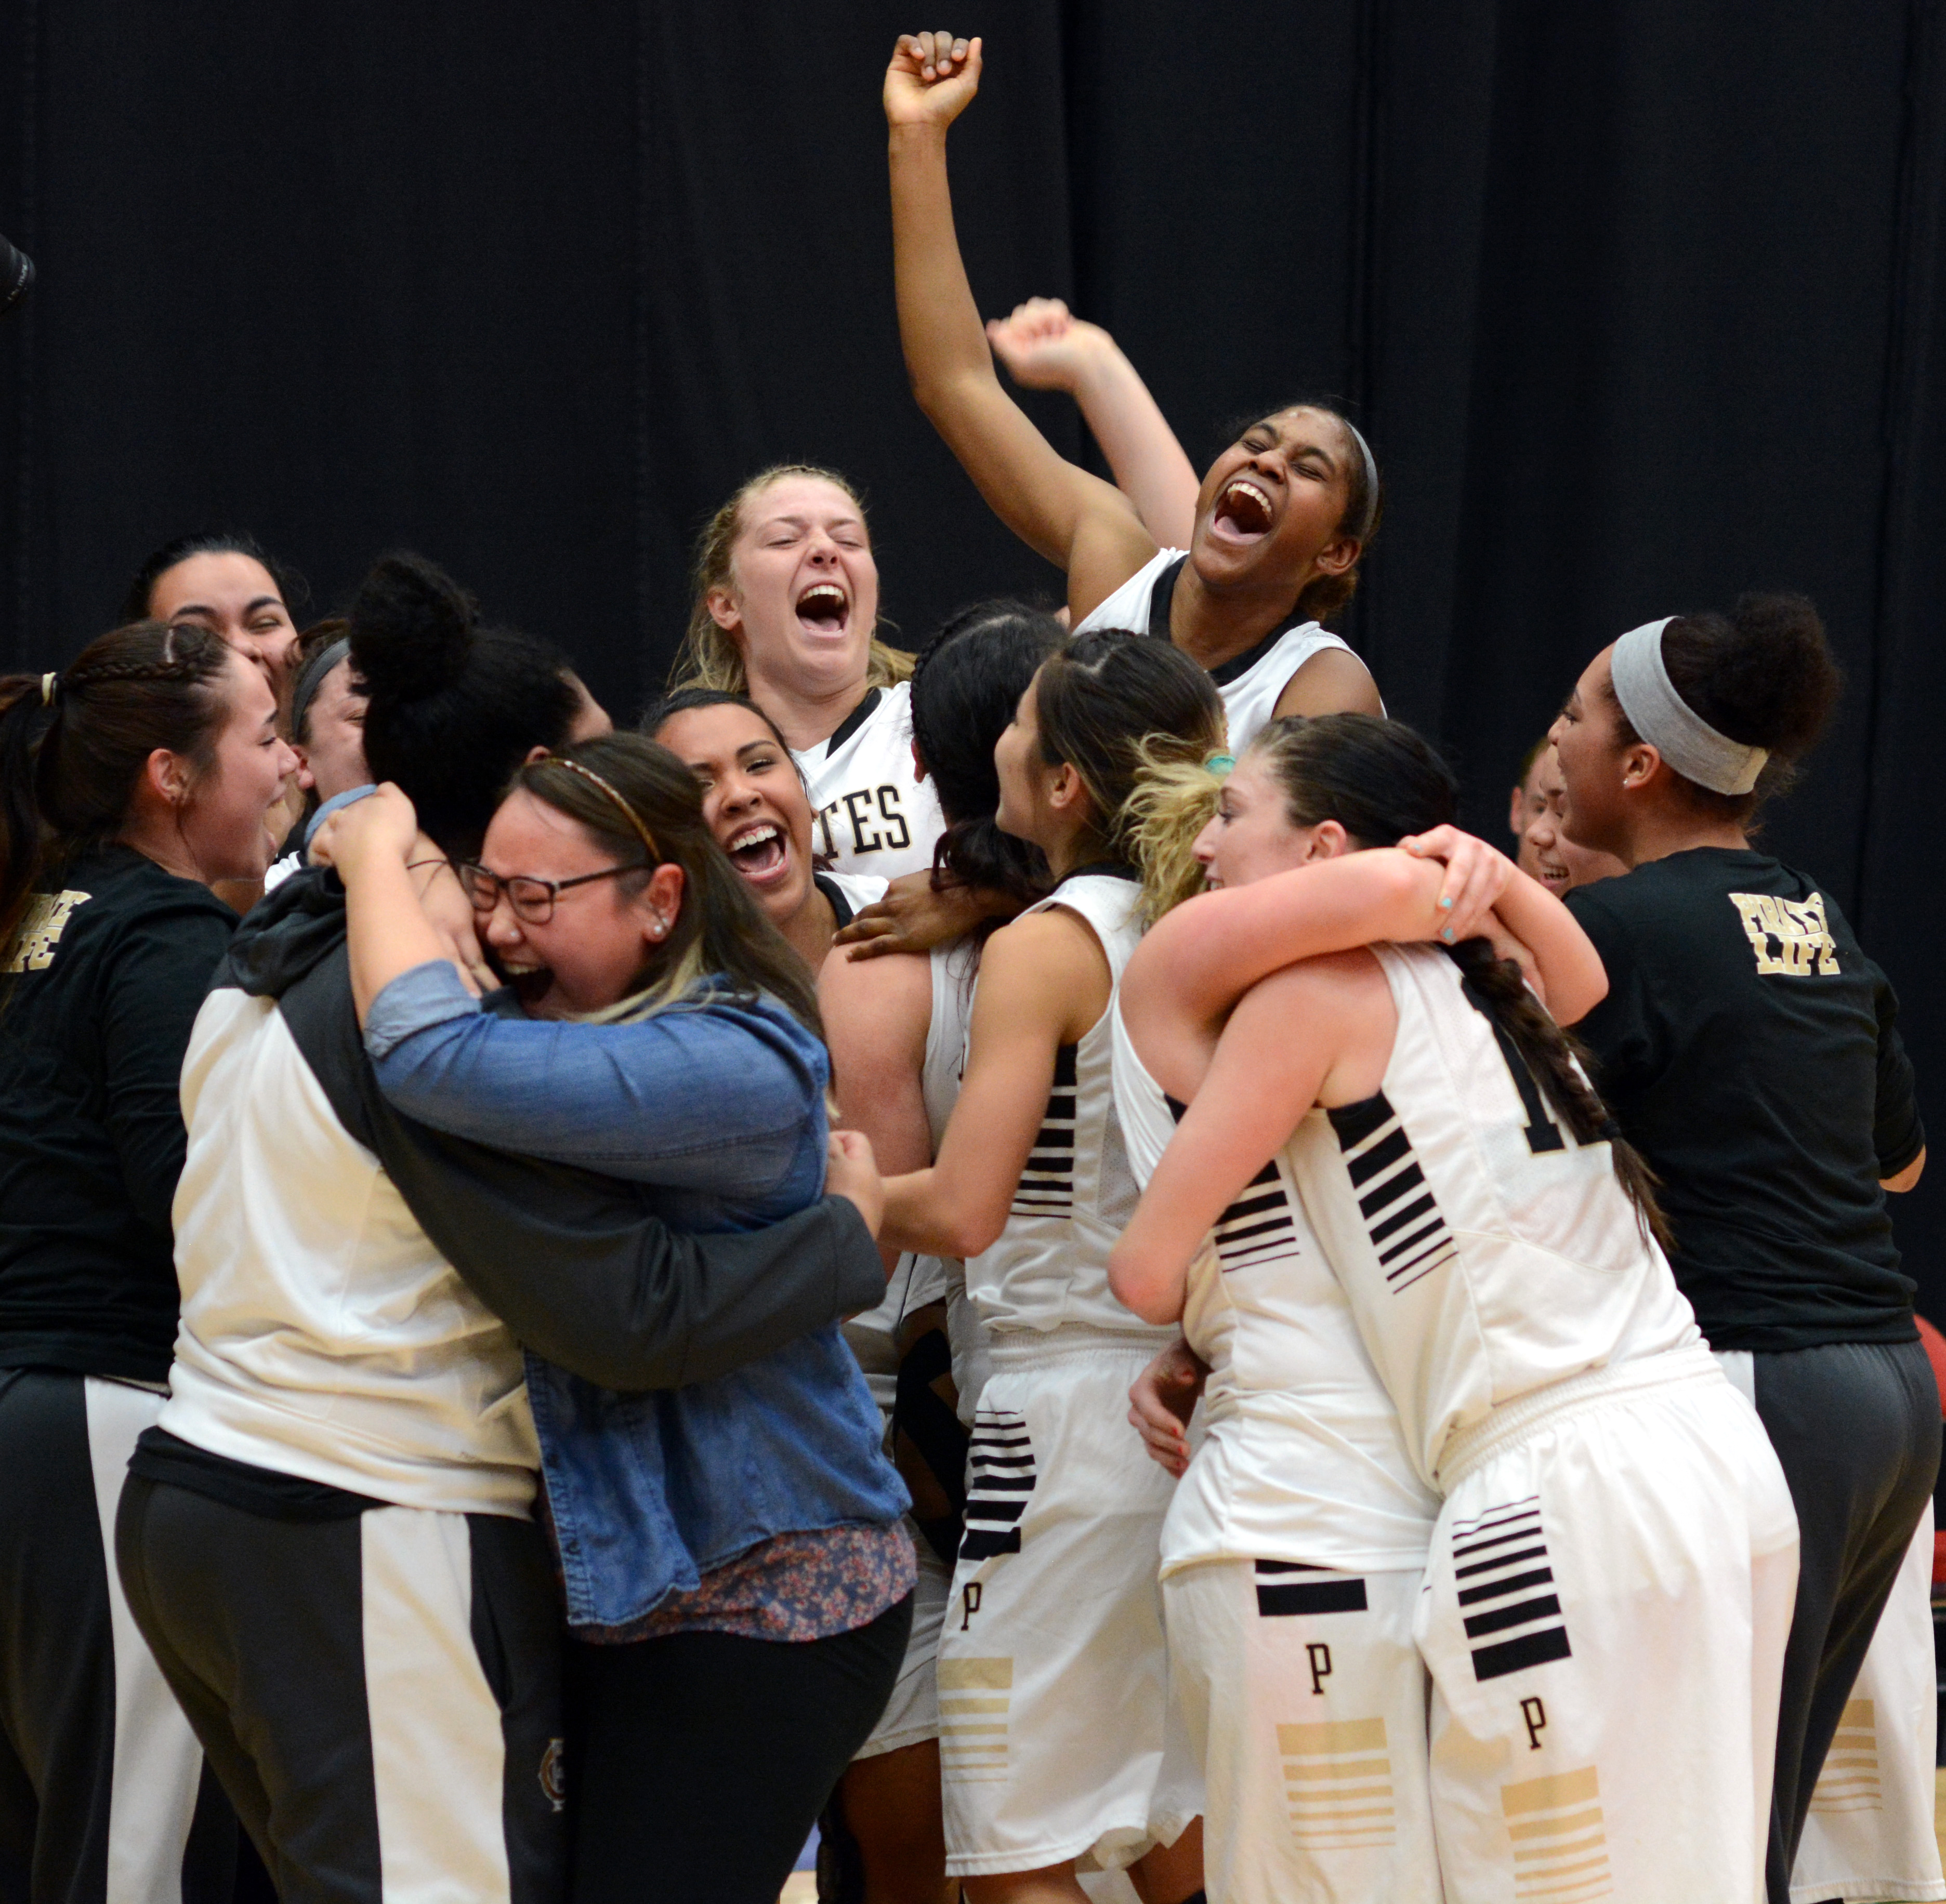 The Peninsula College women's basketball team celebrates winning the Northwest Athletic Conference championship Tuesday in Kennewick. (Rick Ross/Peninsula College)